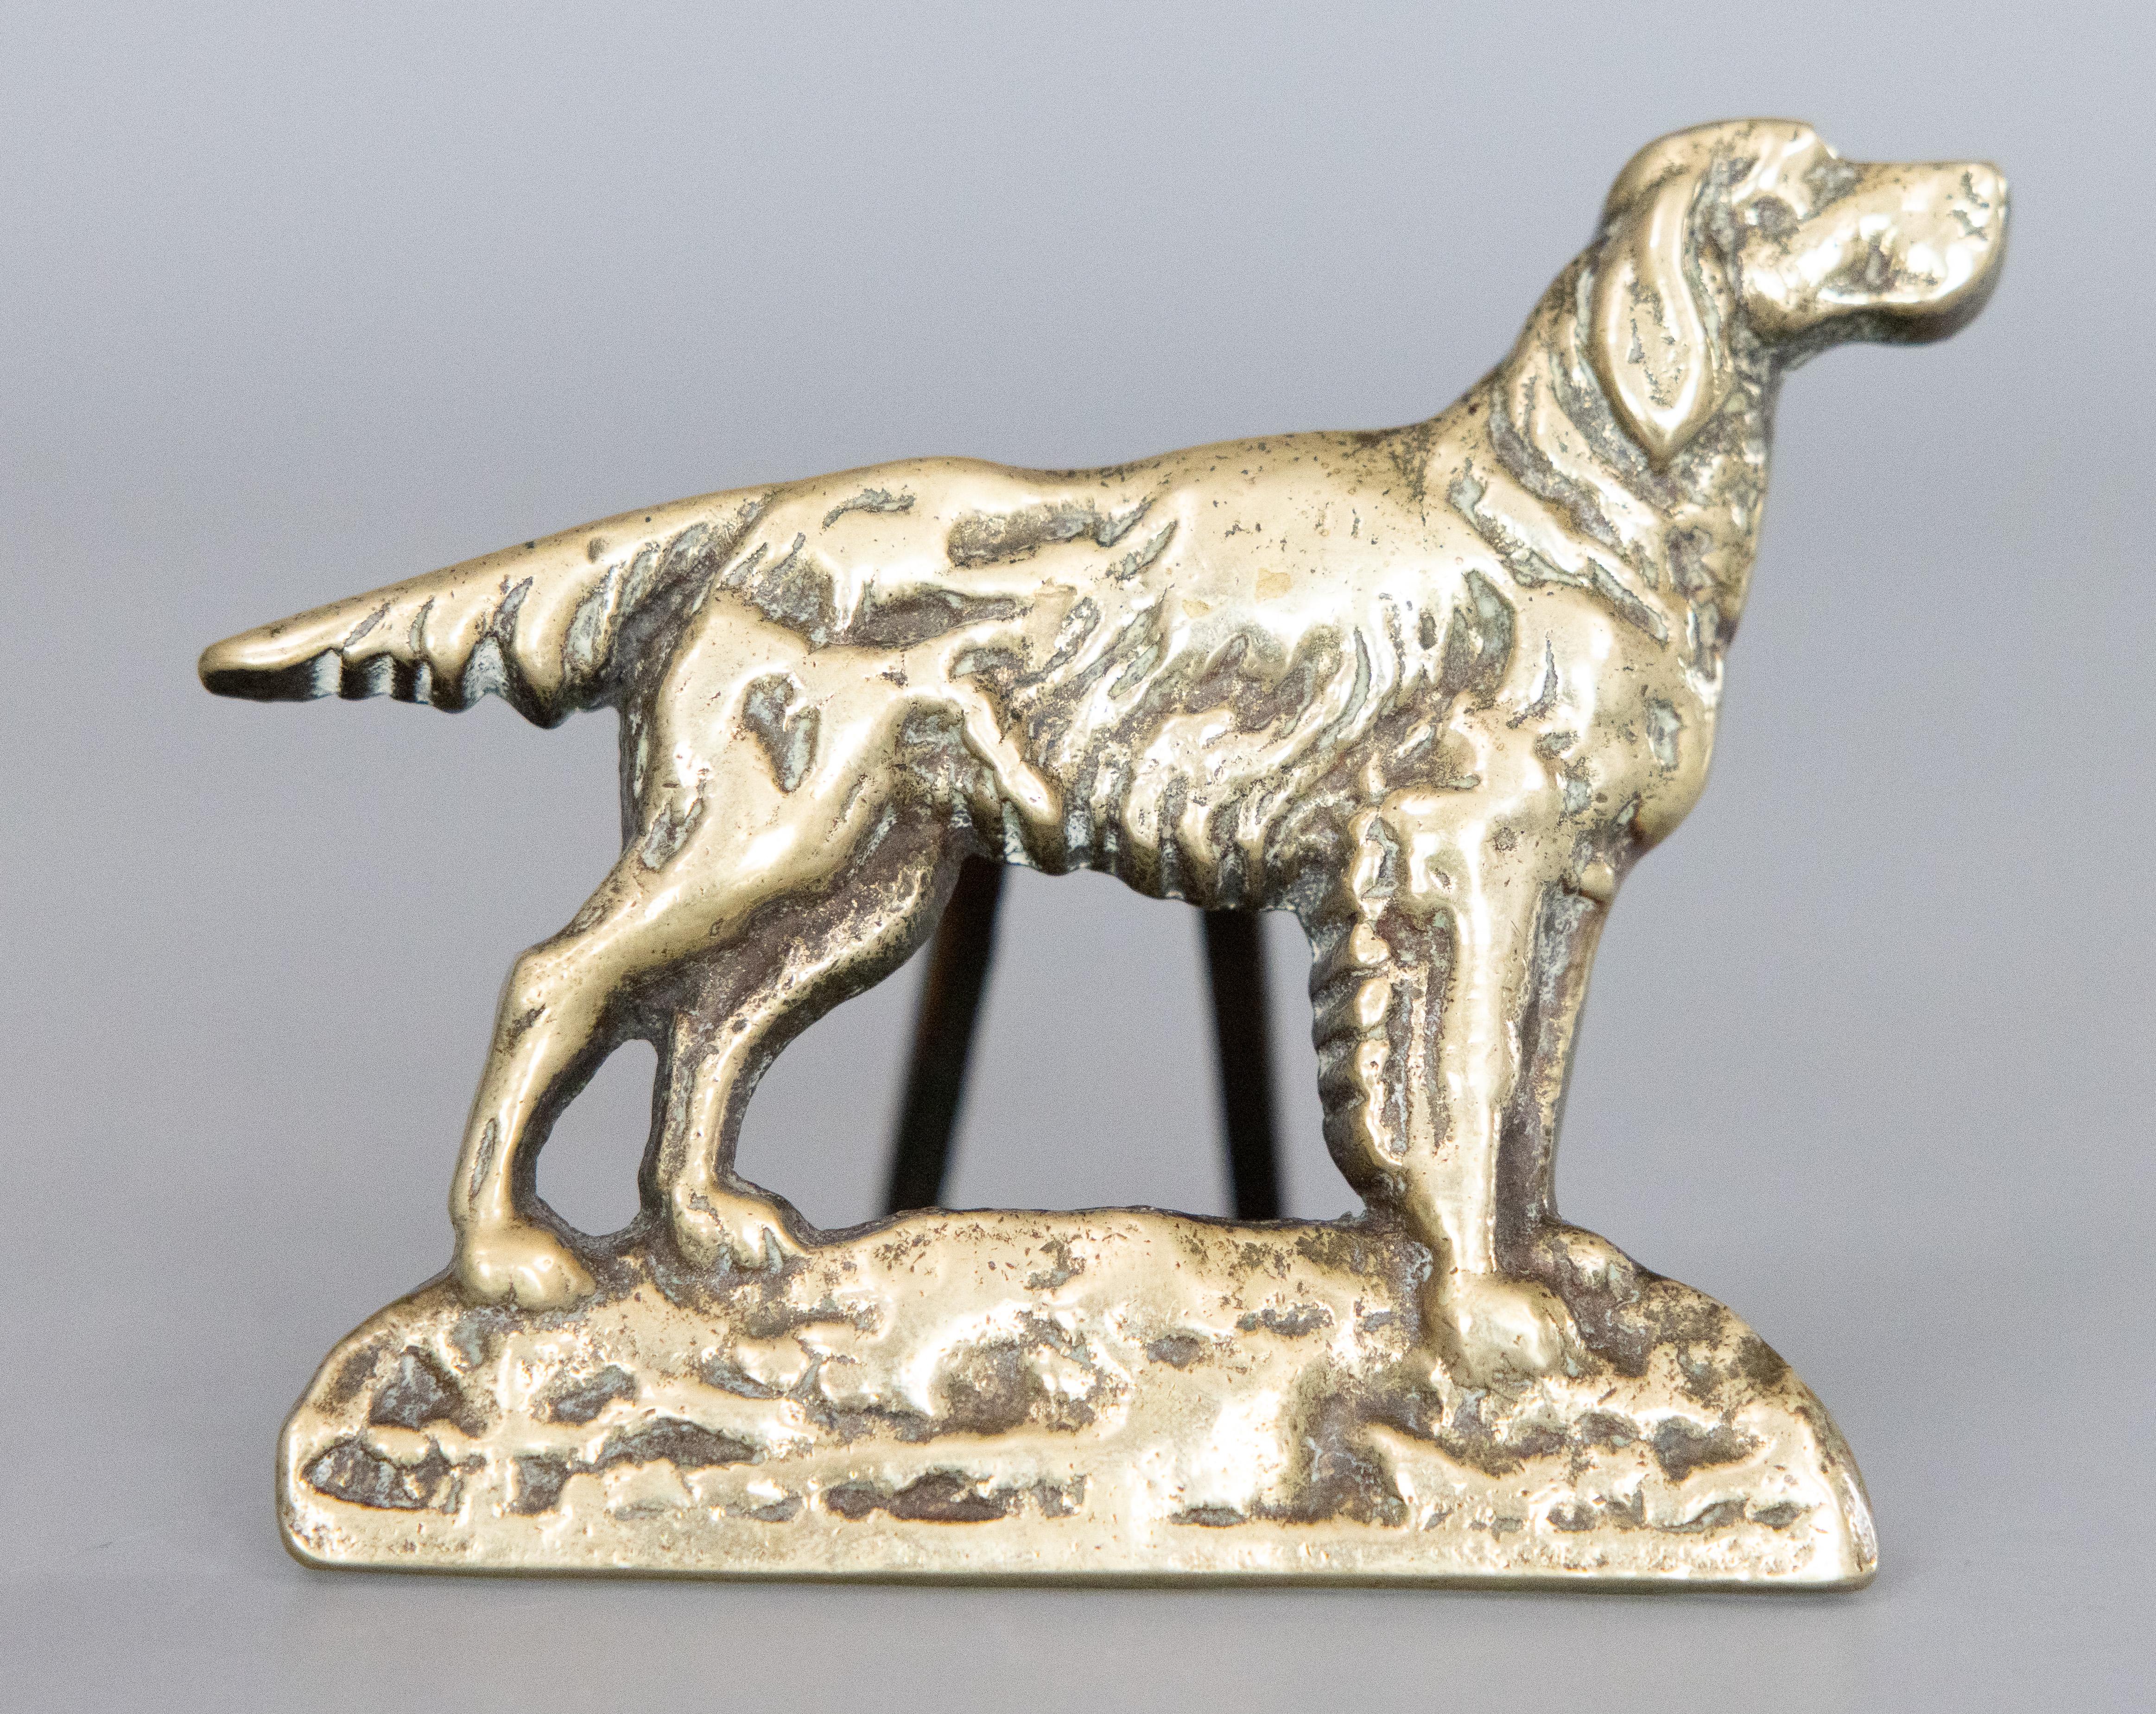 A fine vintage English solid brass setter, pointer, or sporting dog door knocker, circa 1930. This superb door knocker is heavy and well cast in a lovely brass patina. It would be a wonderful housewarming gift or decorative accent for your door, and